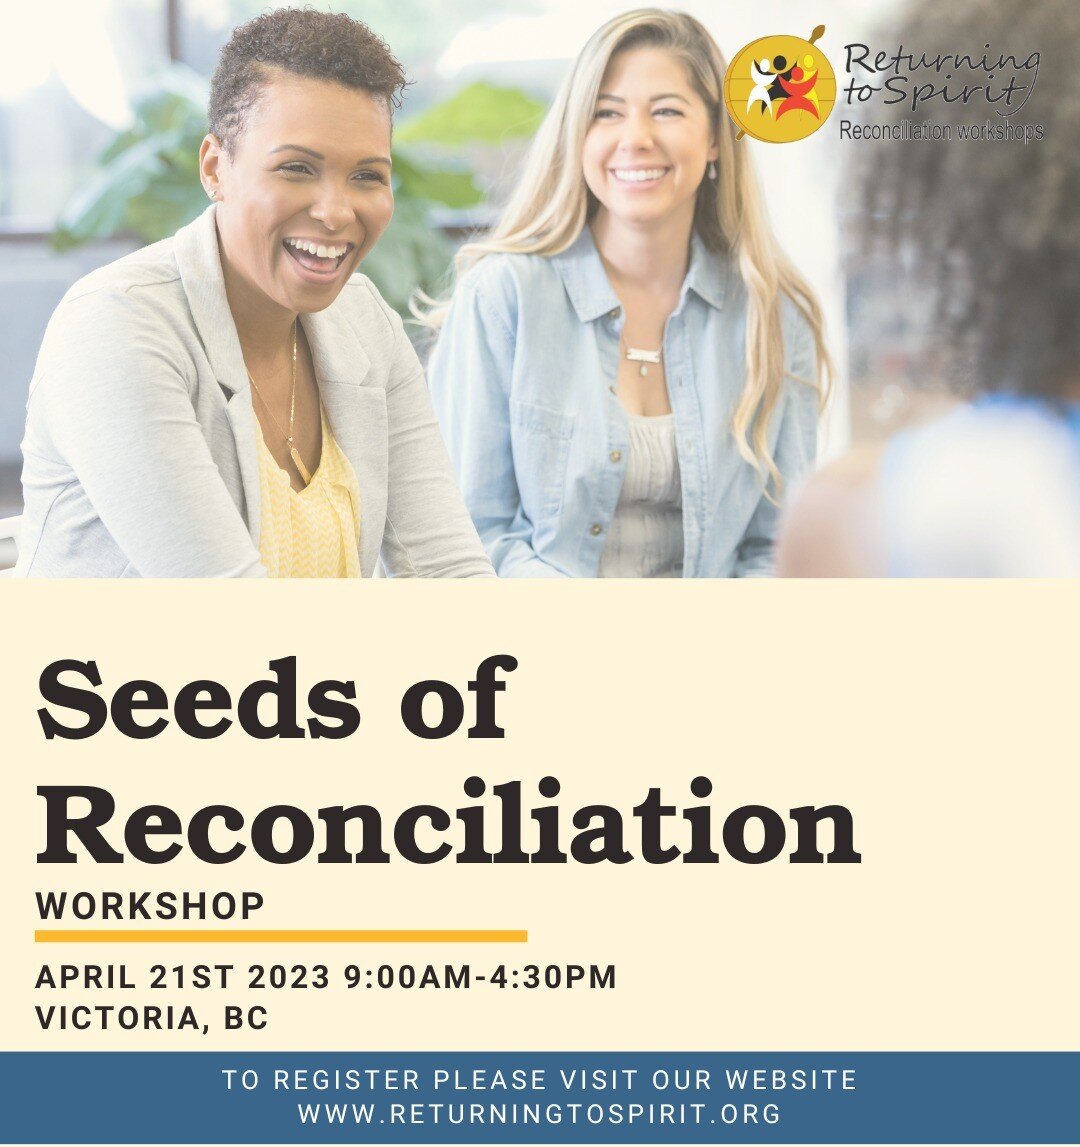 Victoria, BC, We're coming back! We'll be delivering our Seeds of Reconciliation workshop on April 21st and there are still spots available! 

Join us for a day of meaningful conversations &amp; connections. 

Don't miss out! Register today (Link in 